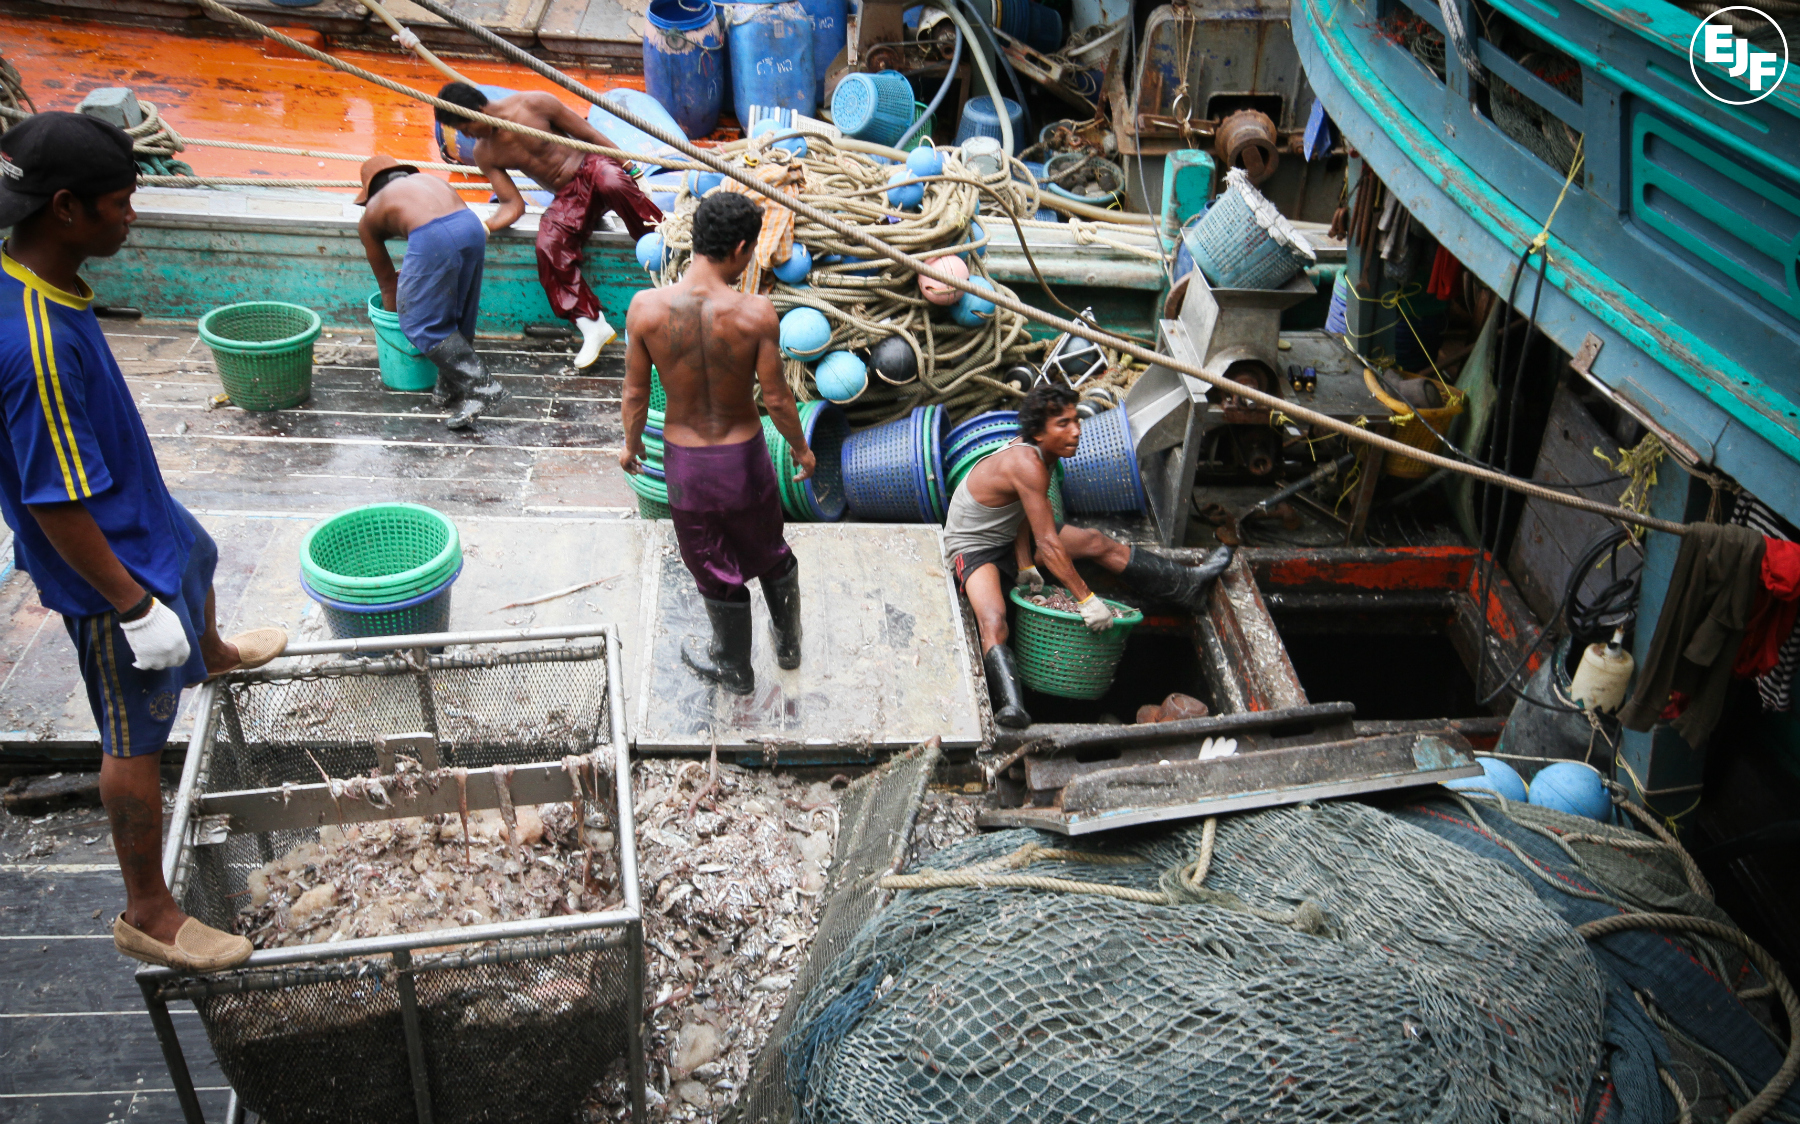 EJF investigation reveals human rights abuses in Thailand's fishing industry